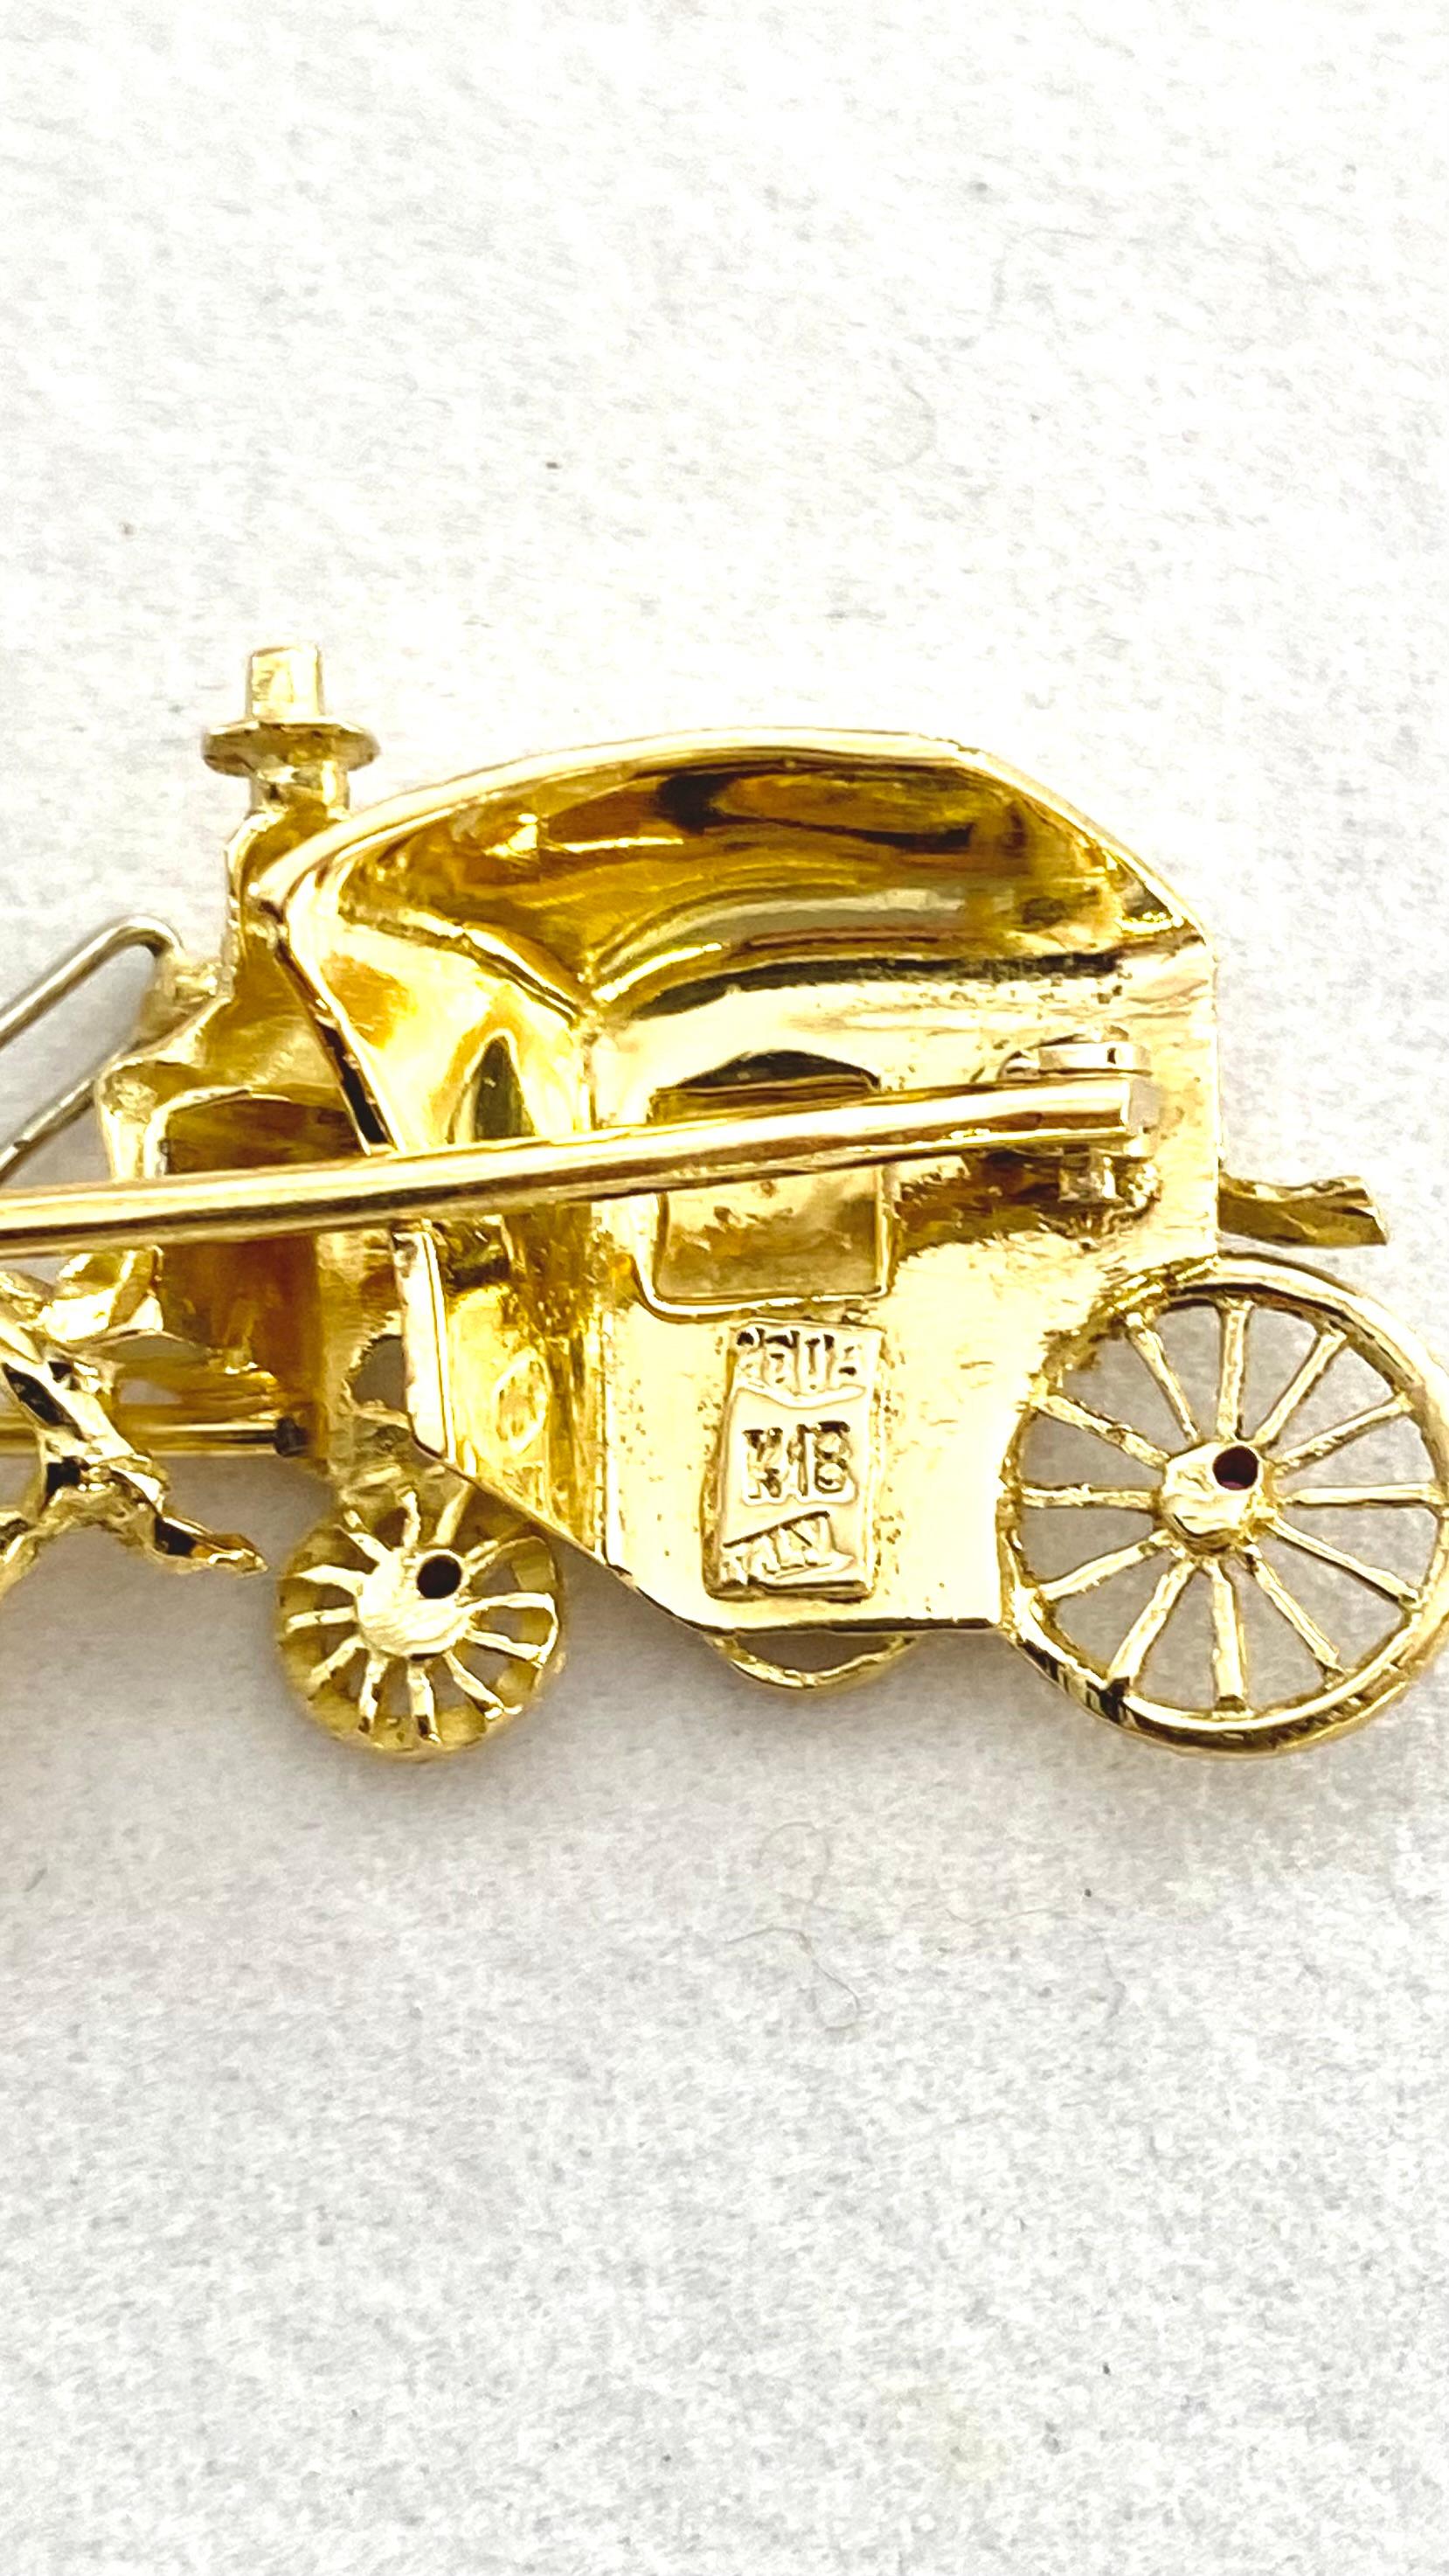 This exquisite Italian brooch is a masterpiece of vintage jewelry design, crafted from luxurious 18-karat yellow gold. The brooch features an enchanting 'Horse and Carriage' motif, beautifully detailed to capture the elegance and romance of a bygone